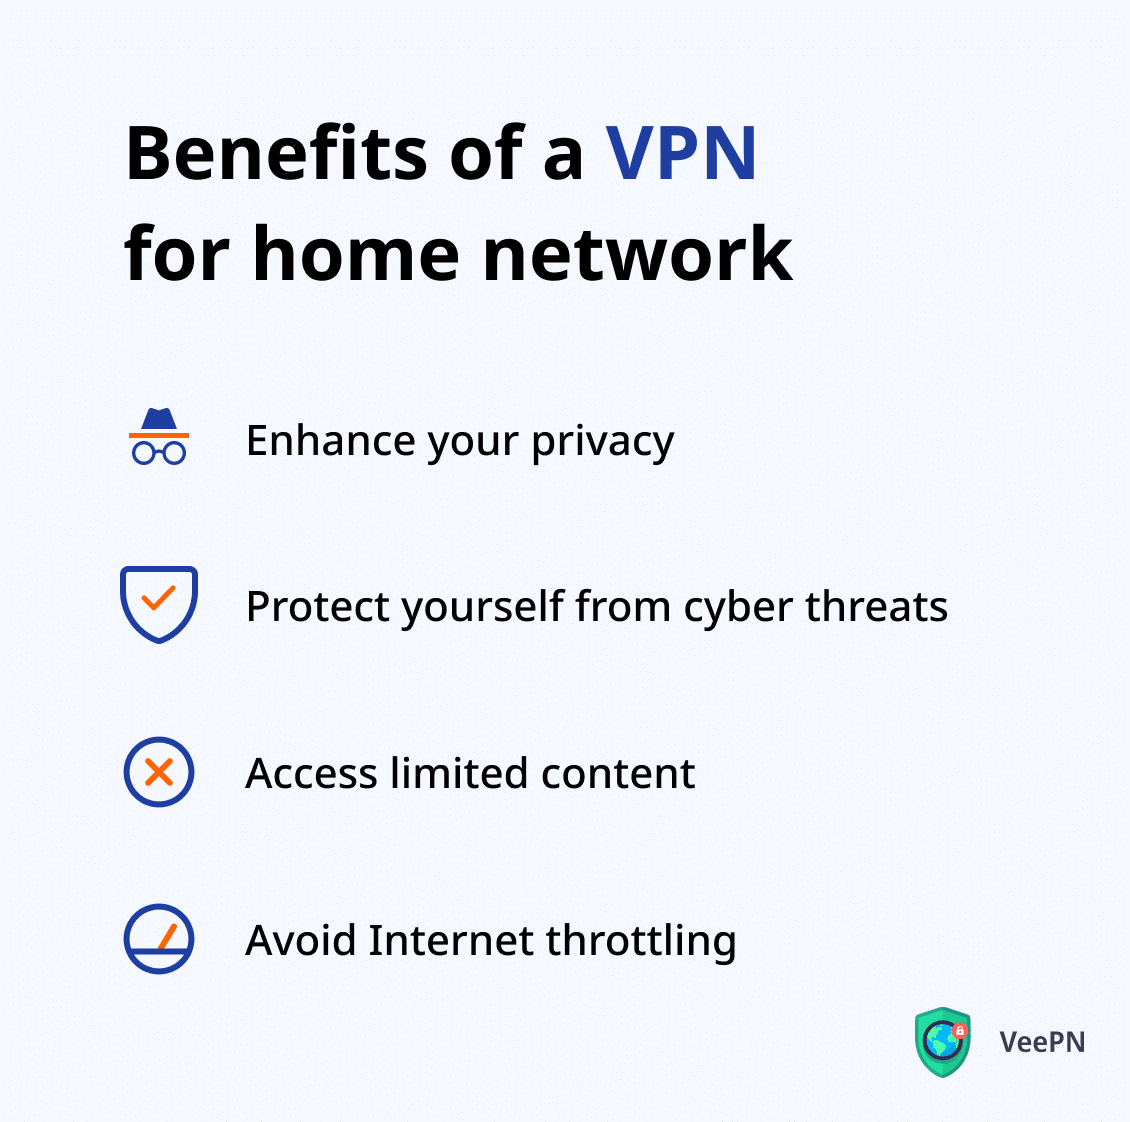 Benefits of a VPN for home network